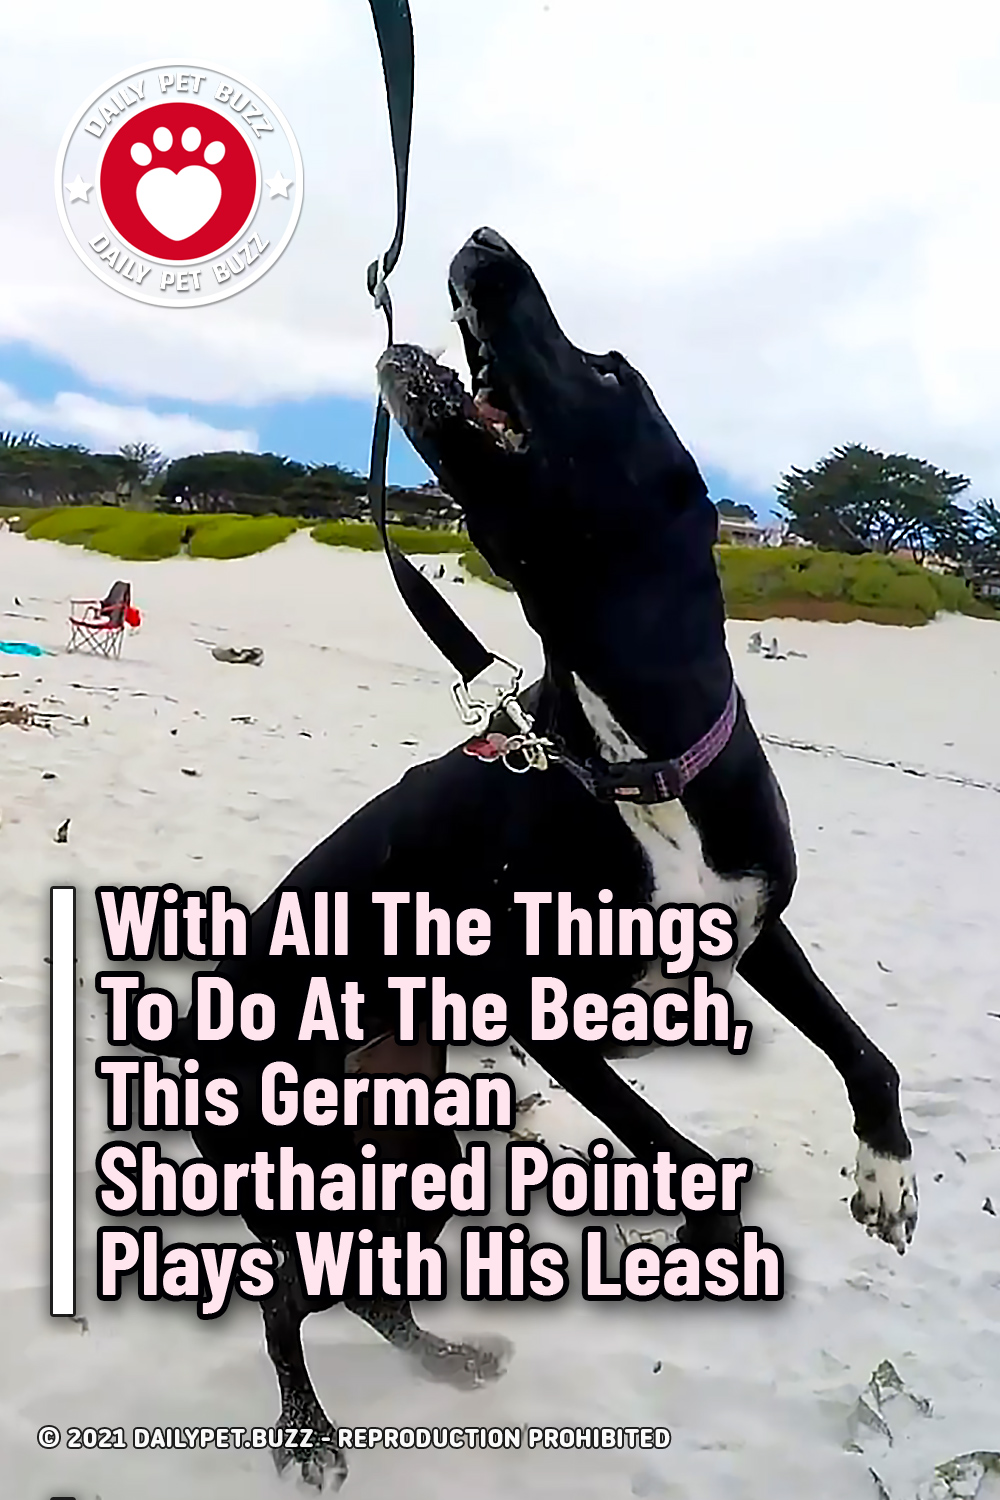 With All The Things To Do At The Beach, This German Shorthaired Pointer Plays With His Leash